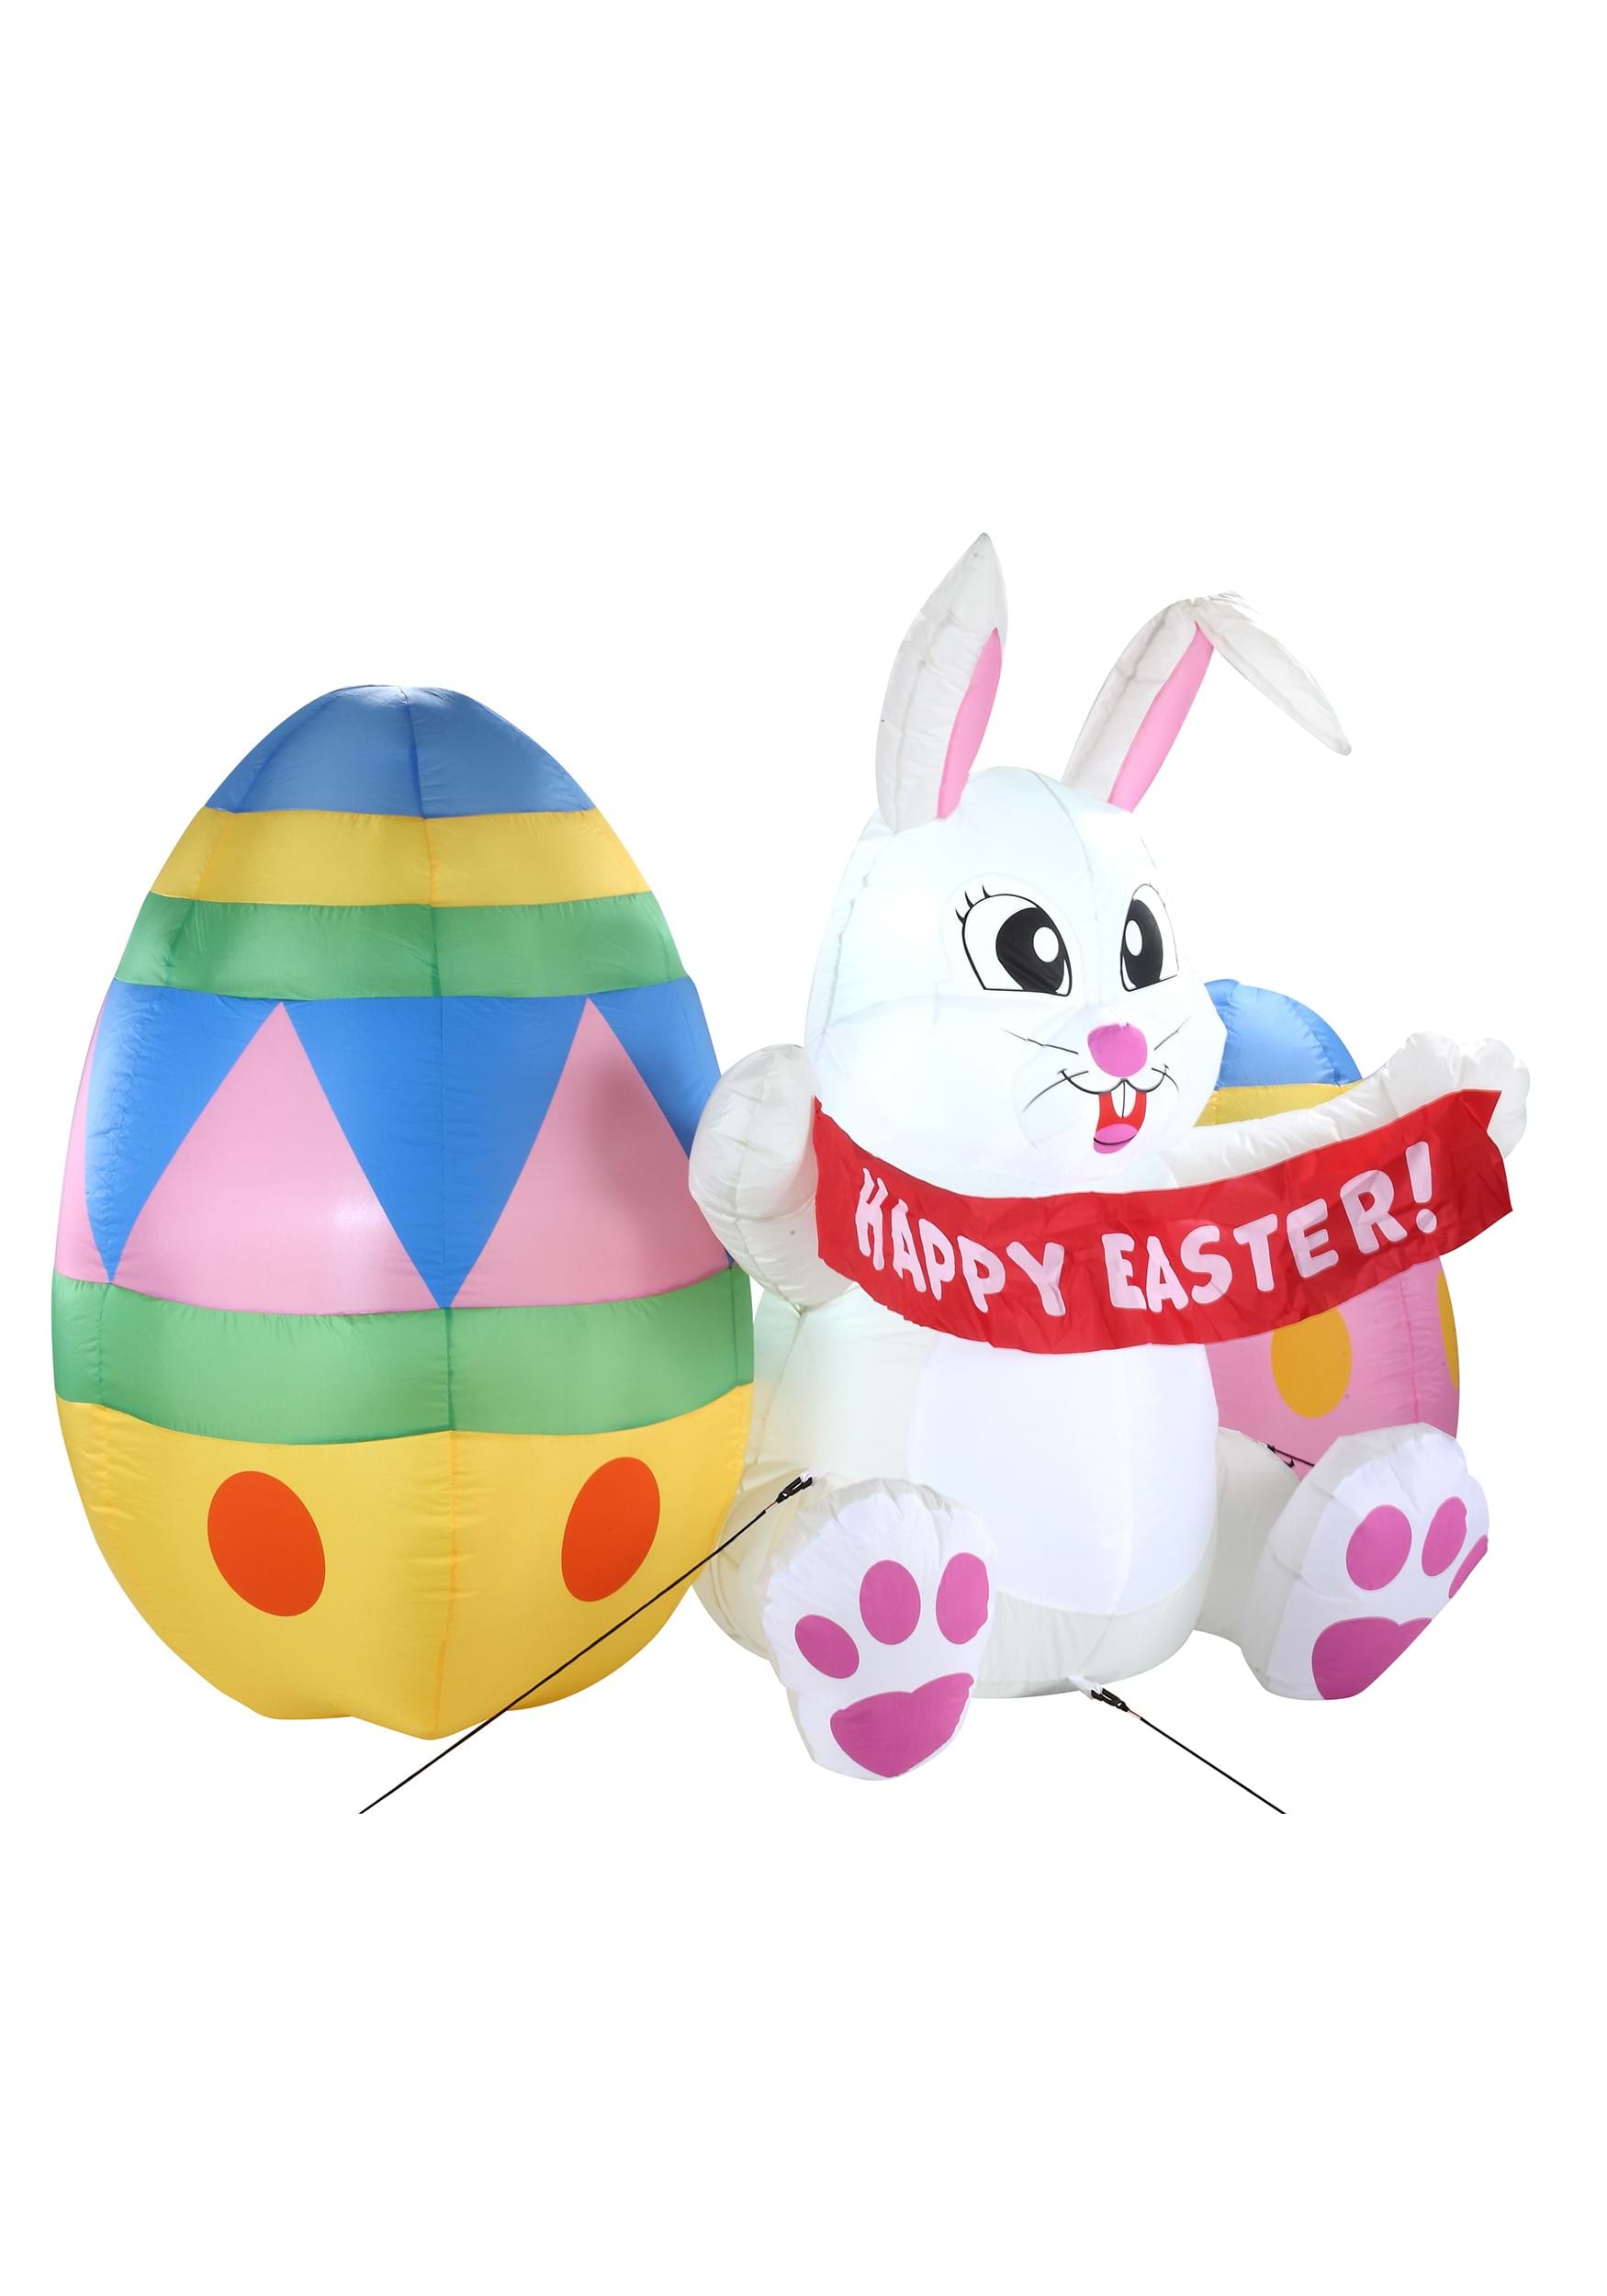 Large Easter Bunny 6FT Tall Inflatable Decoration